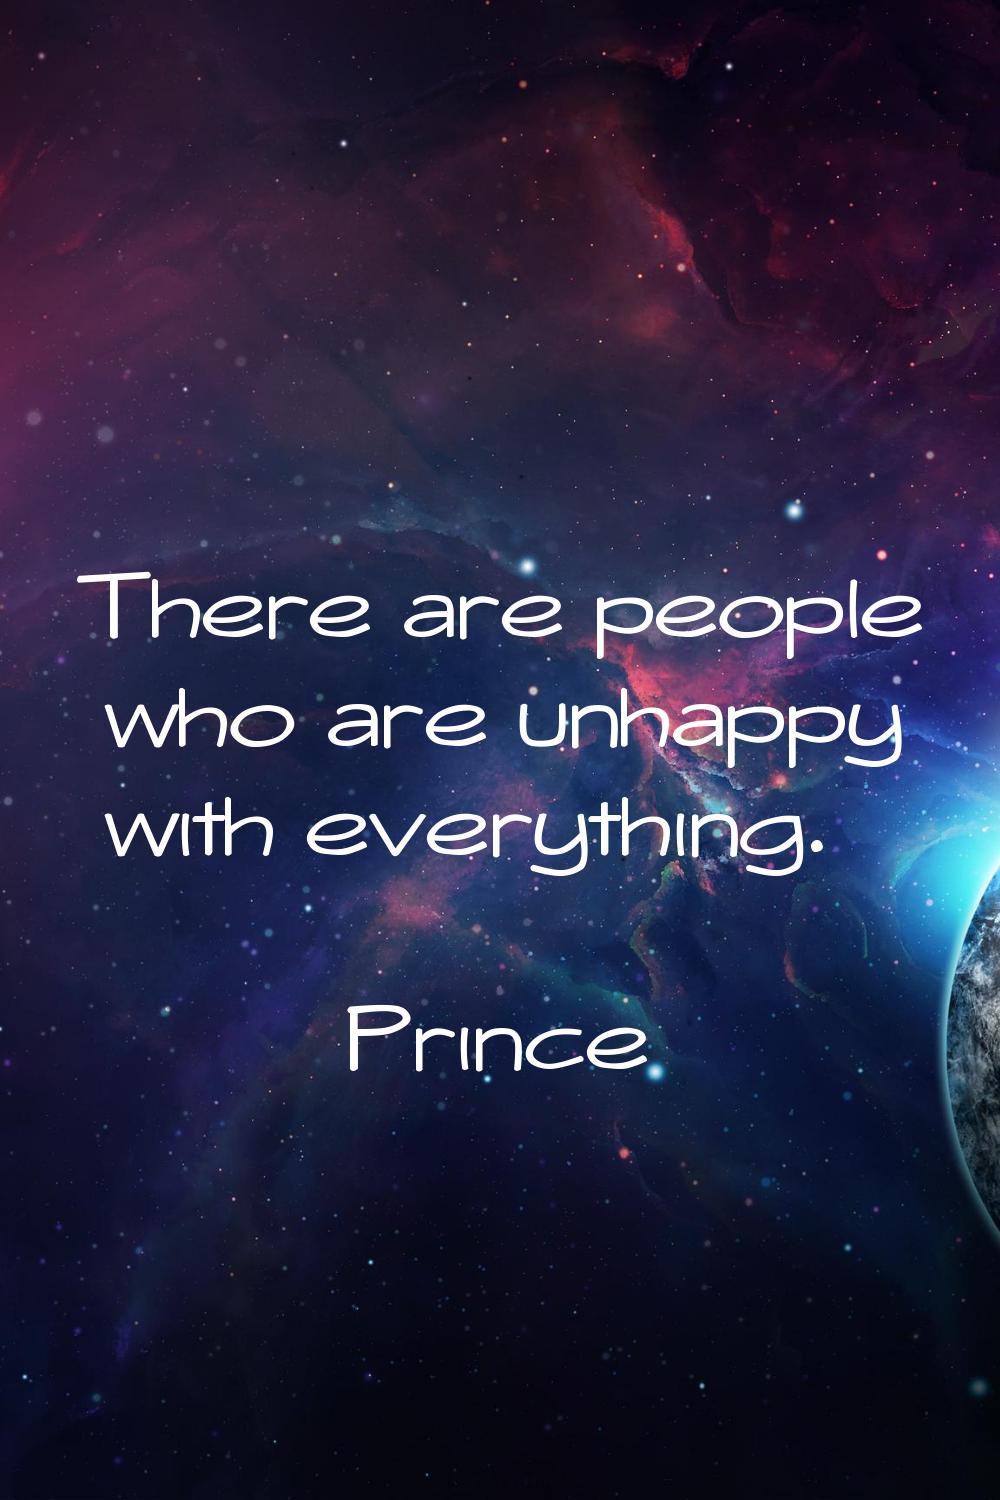 There are people who are unhappy with everything.